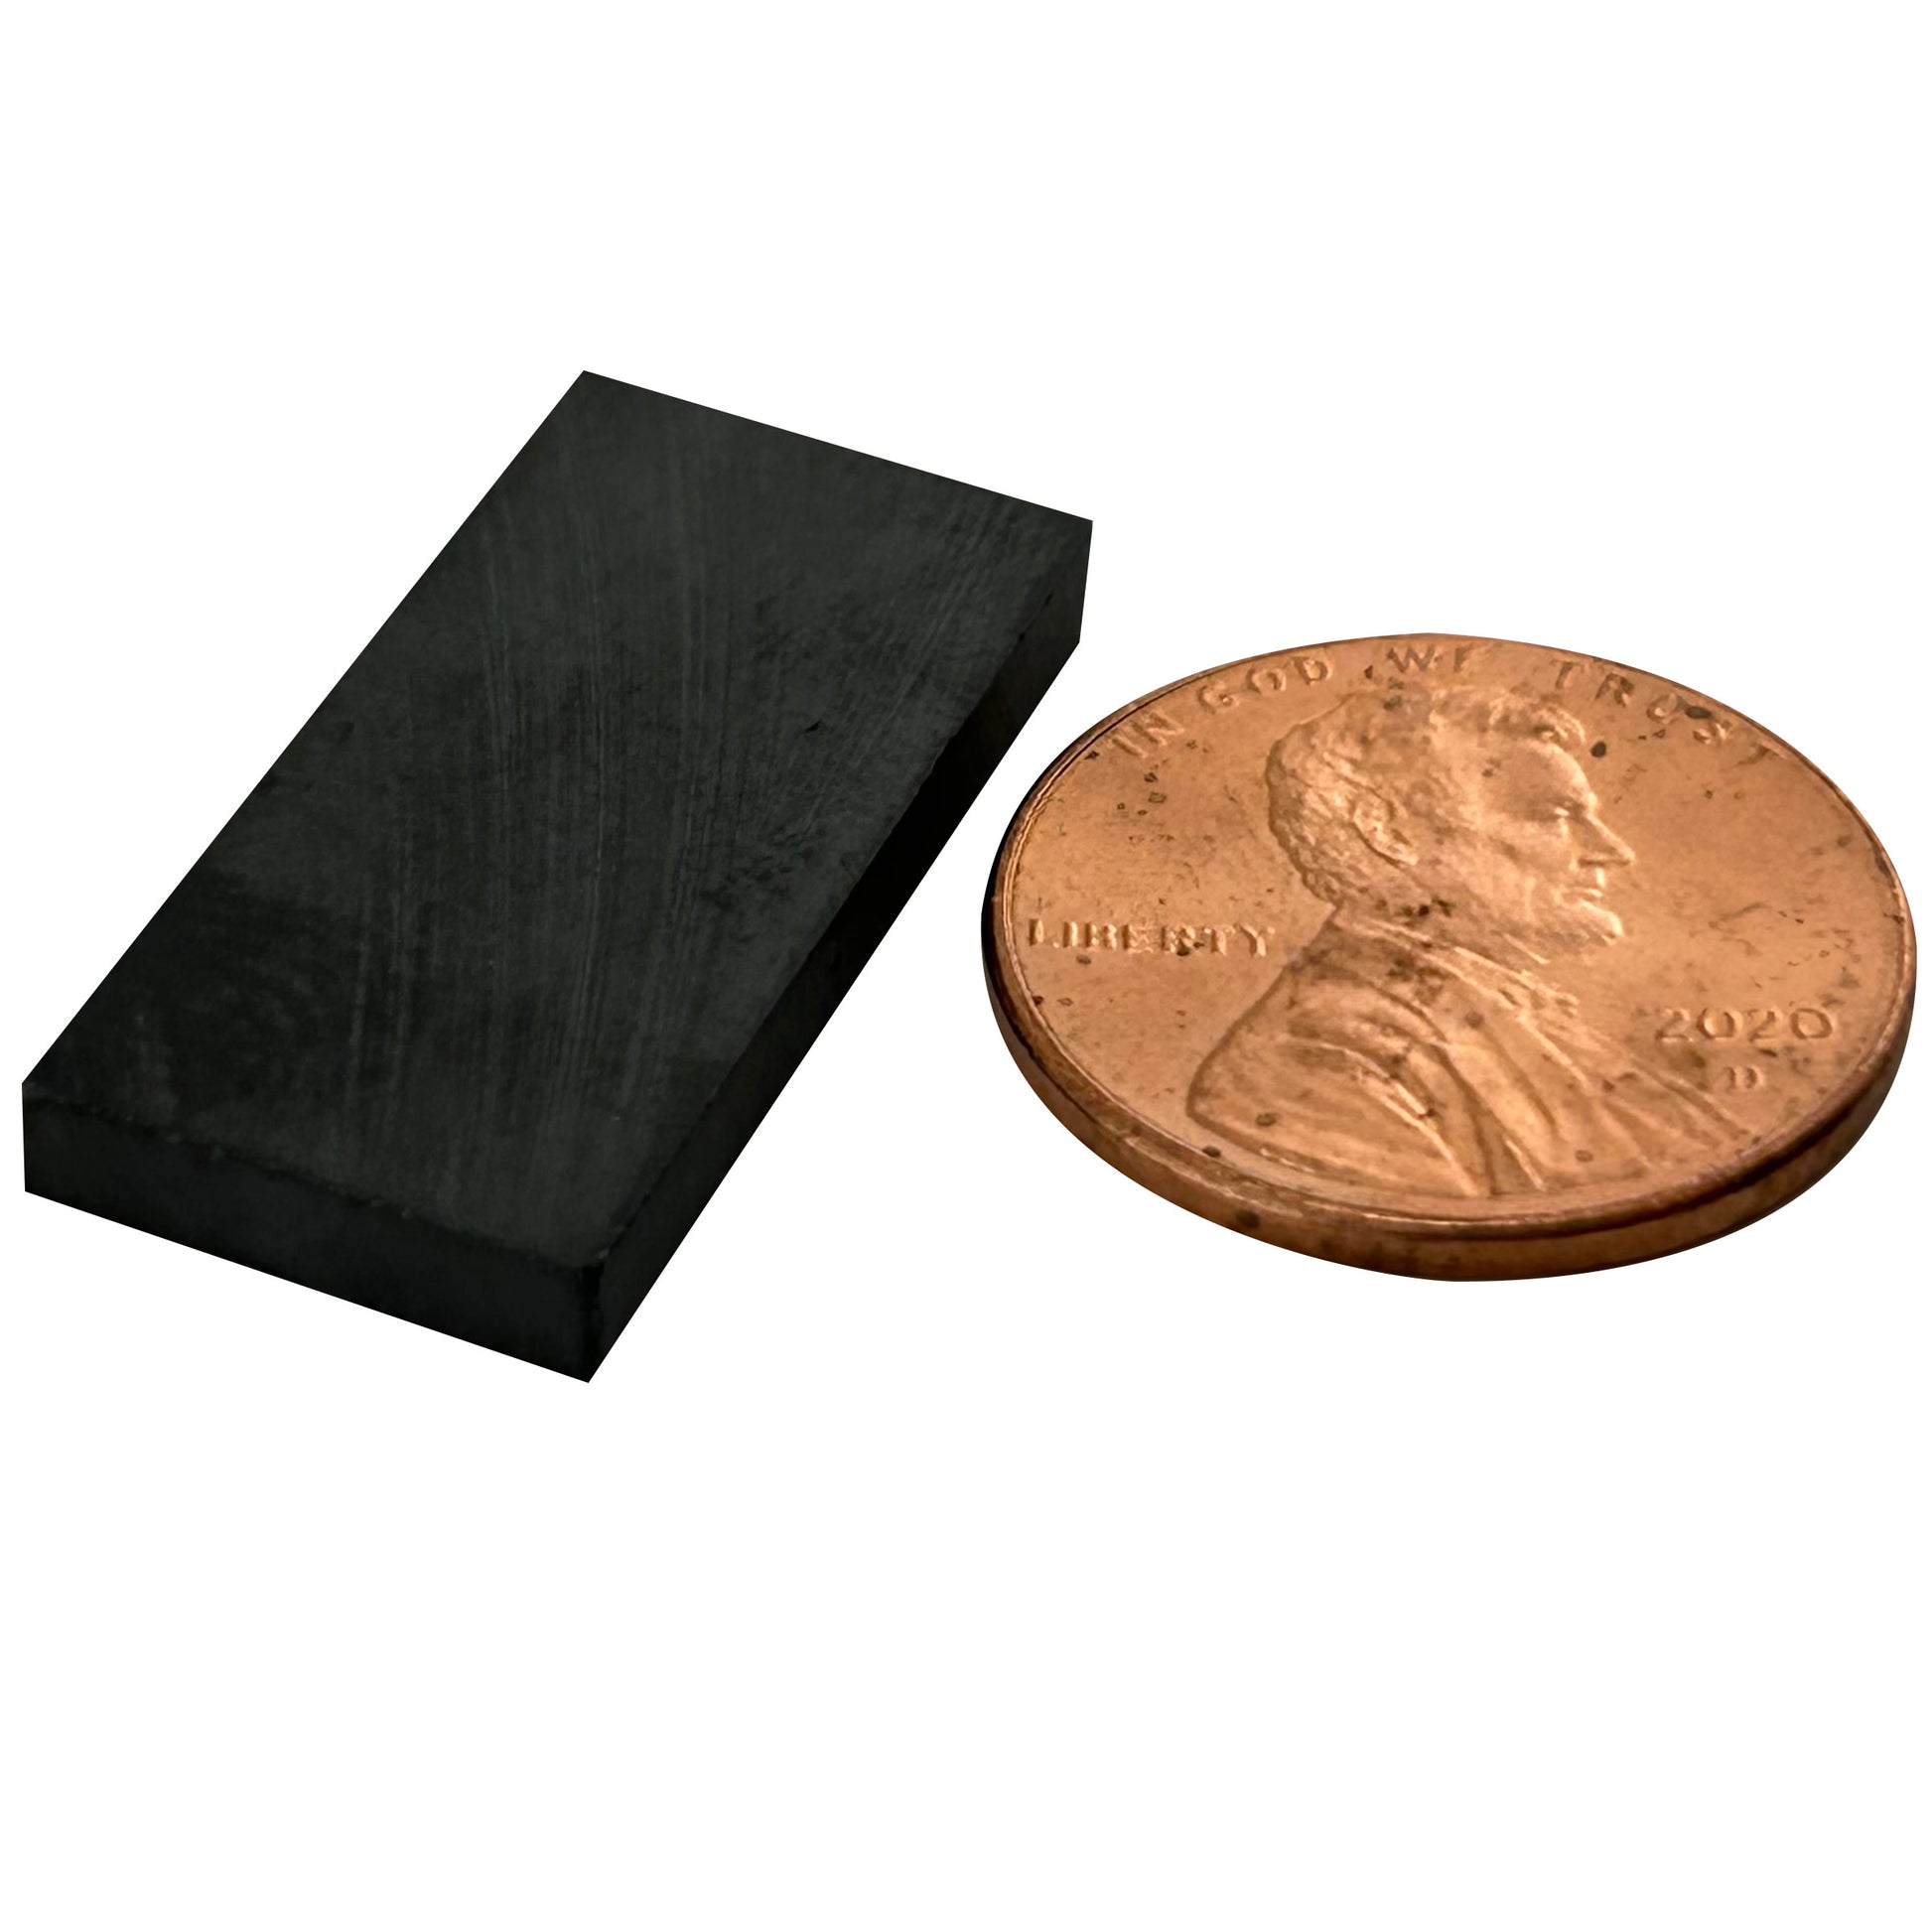 Load image into Gallery viewer, CB005036-S Ceramic Block Magnet - 45 Degree Angle View Compared to Penny